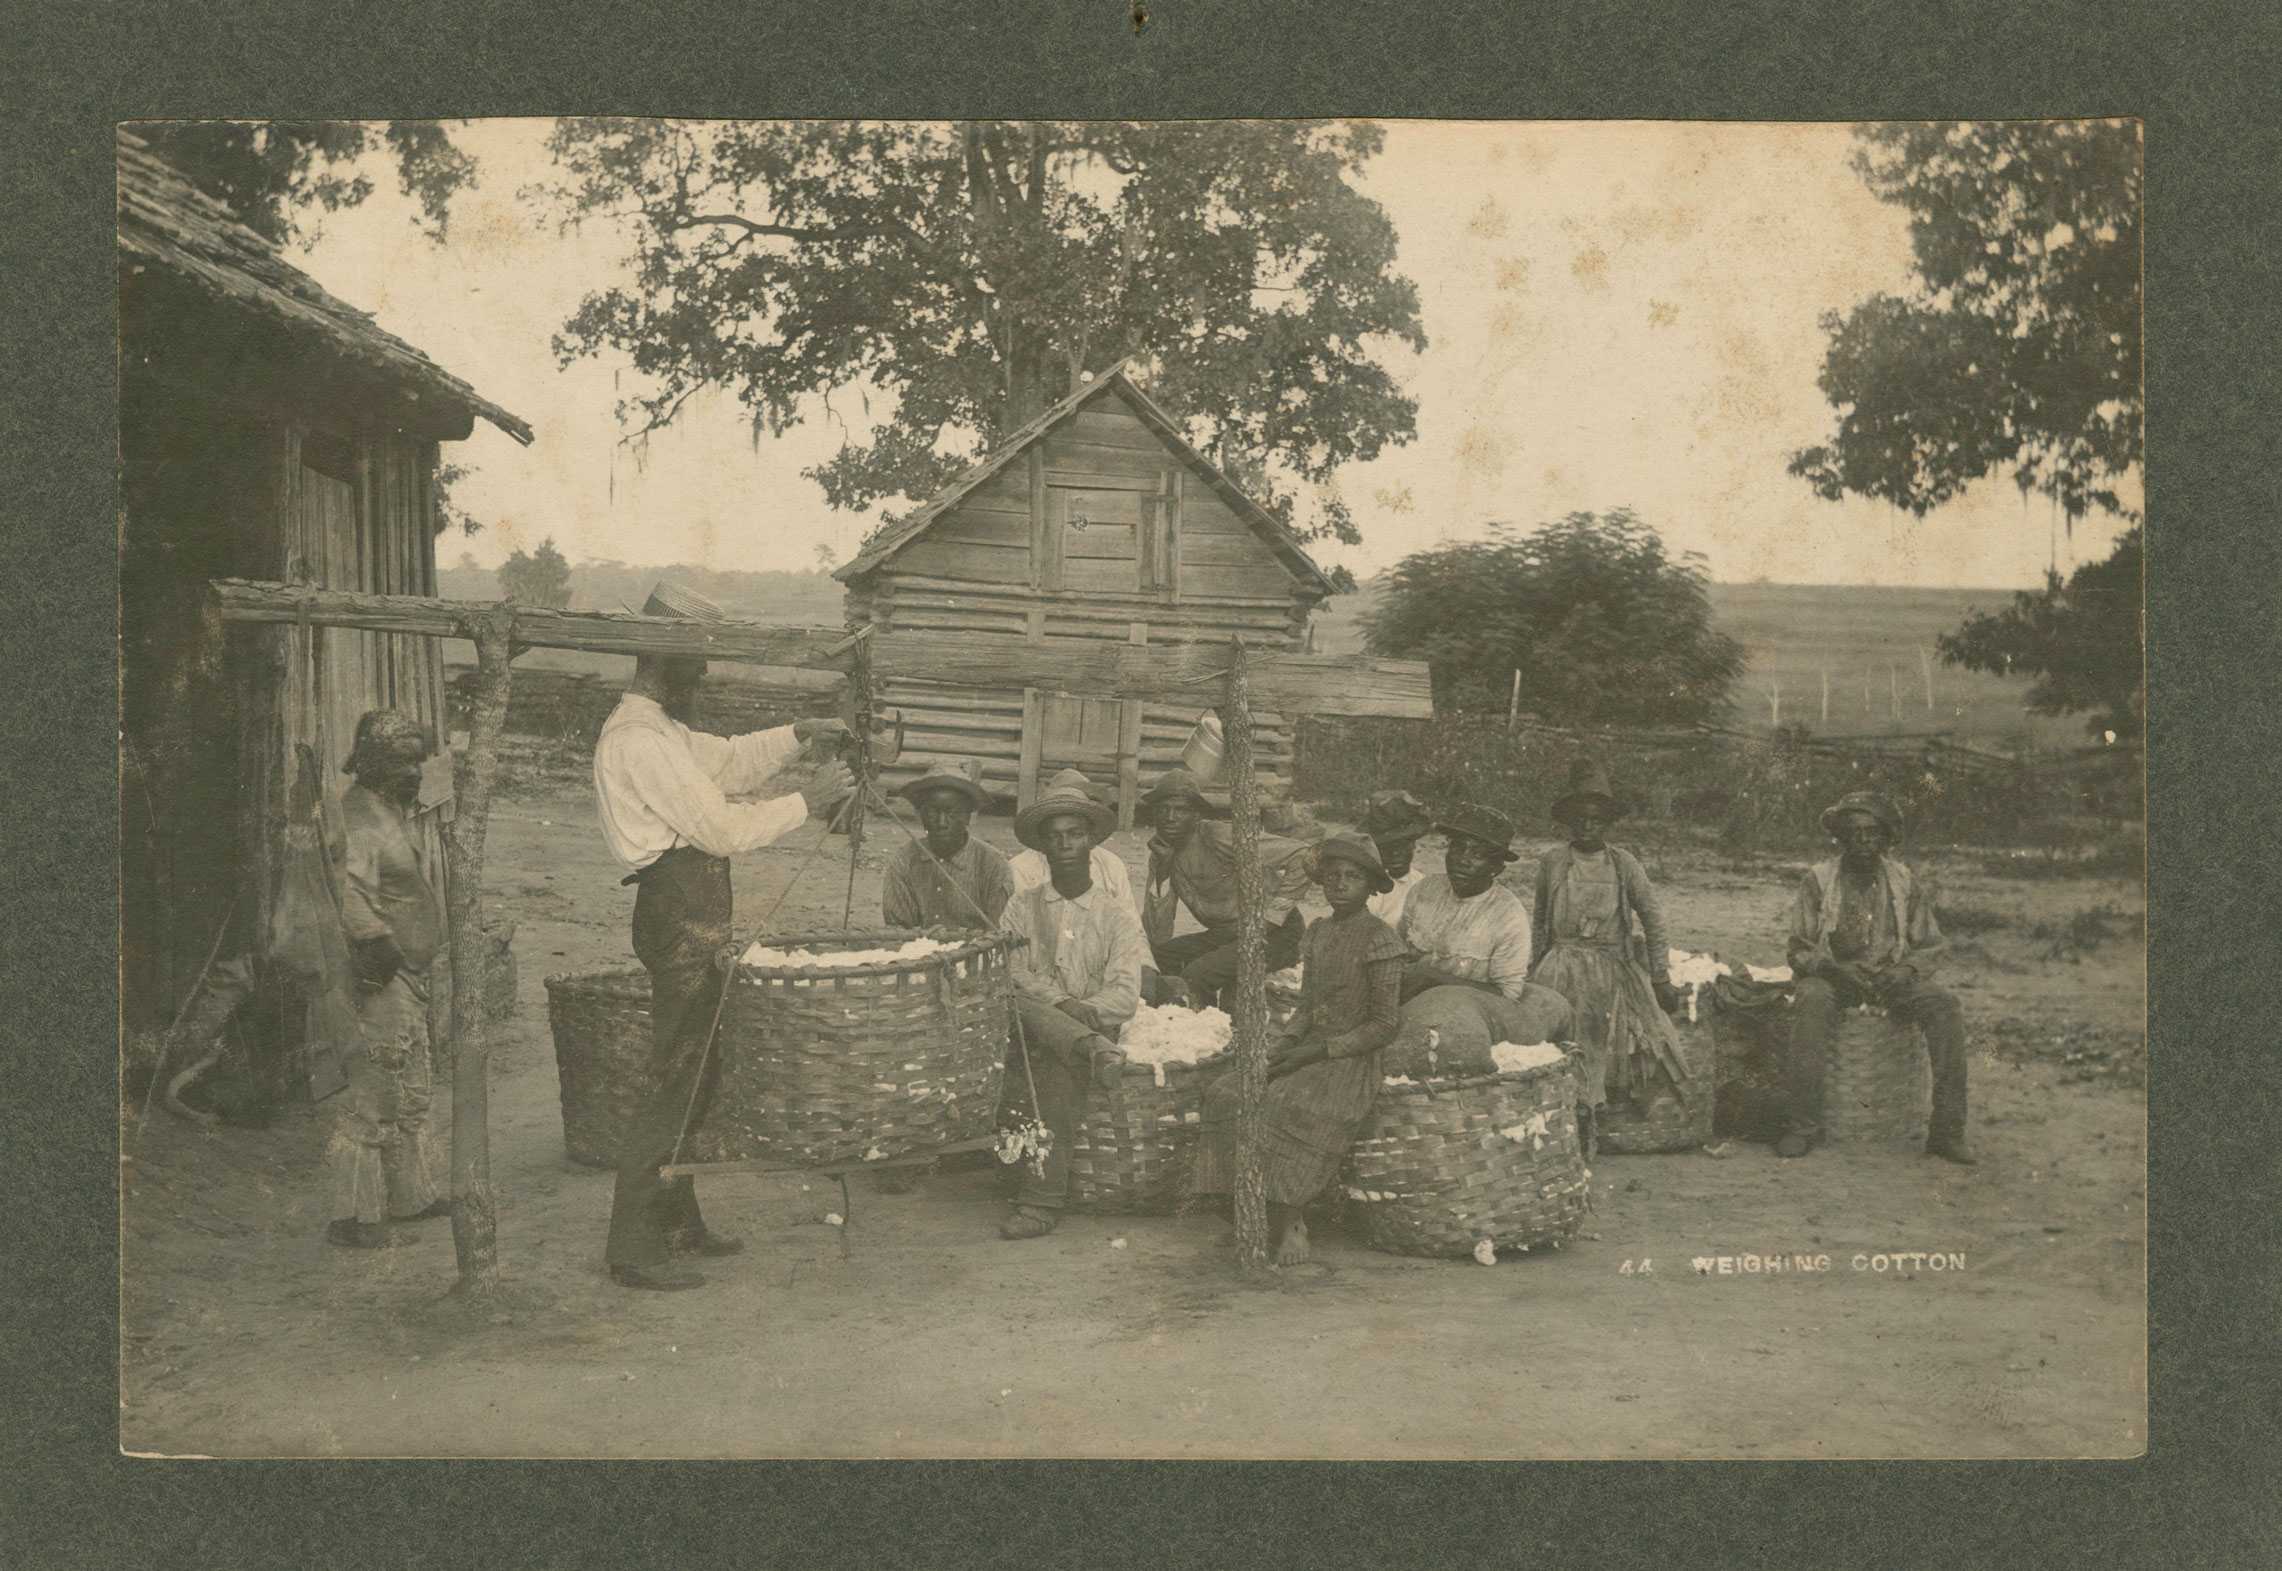 An albumen print on cabinet card of a group of people weighing cotton.